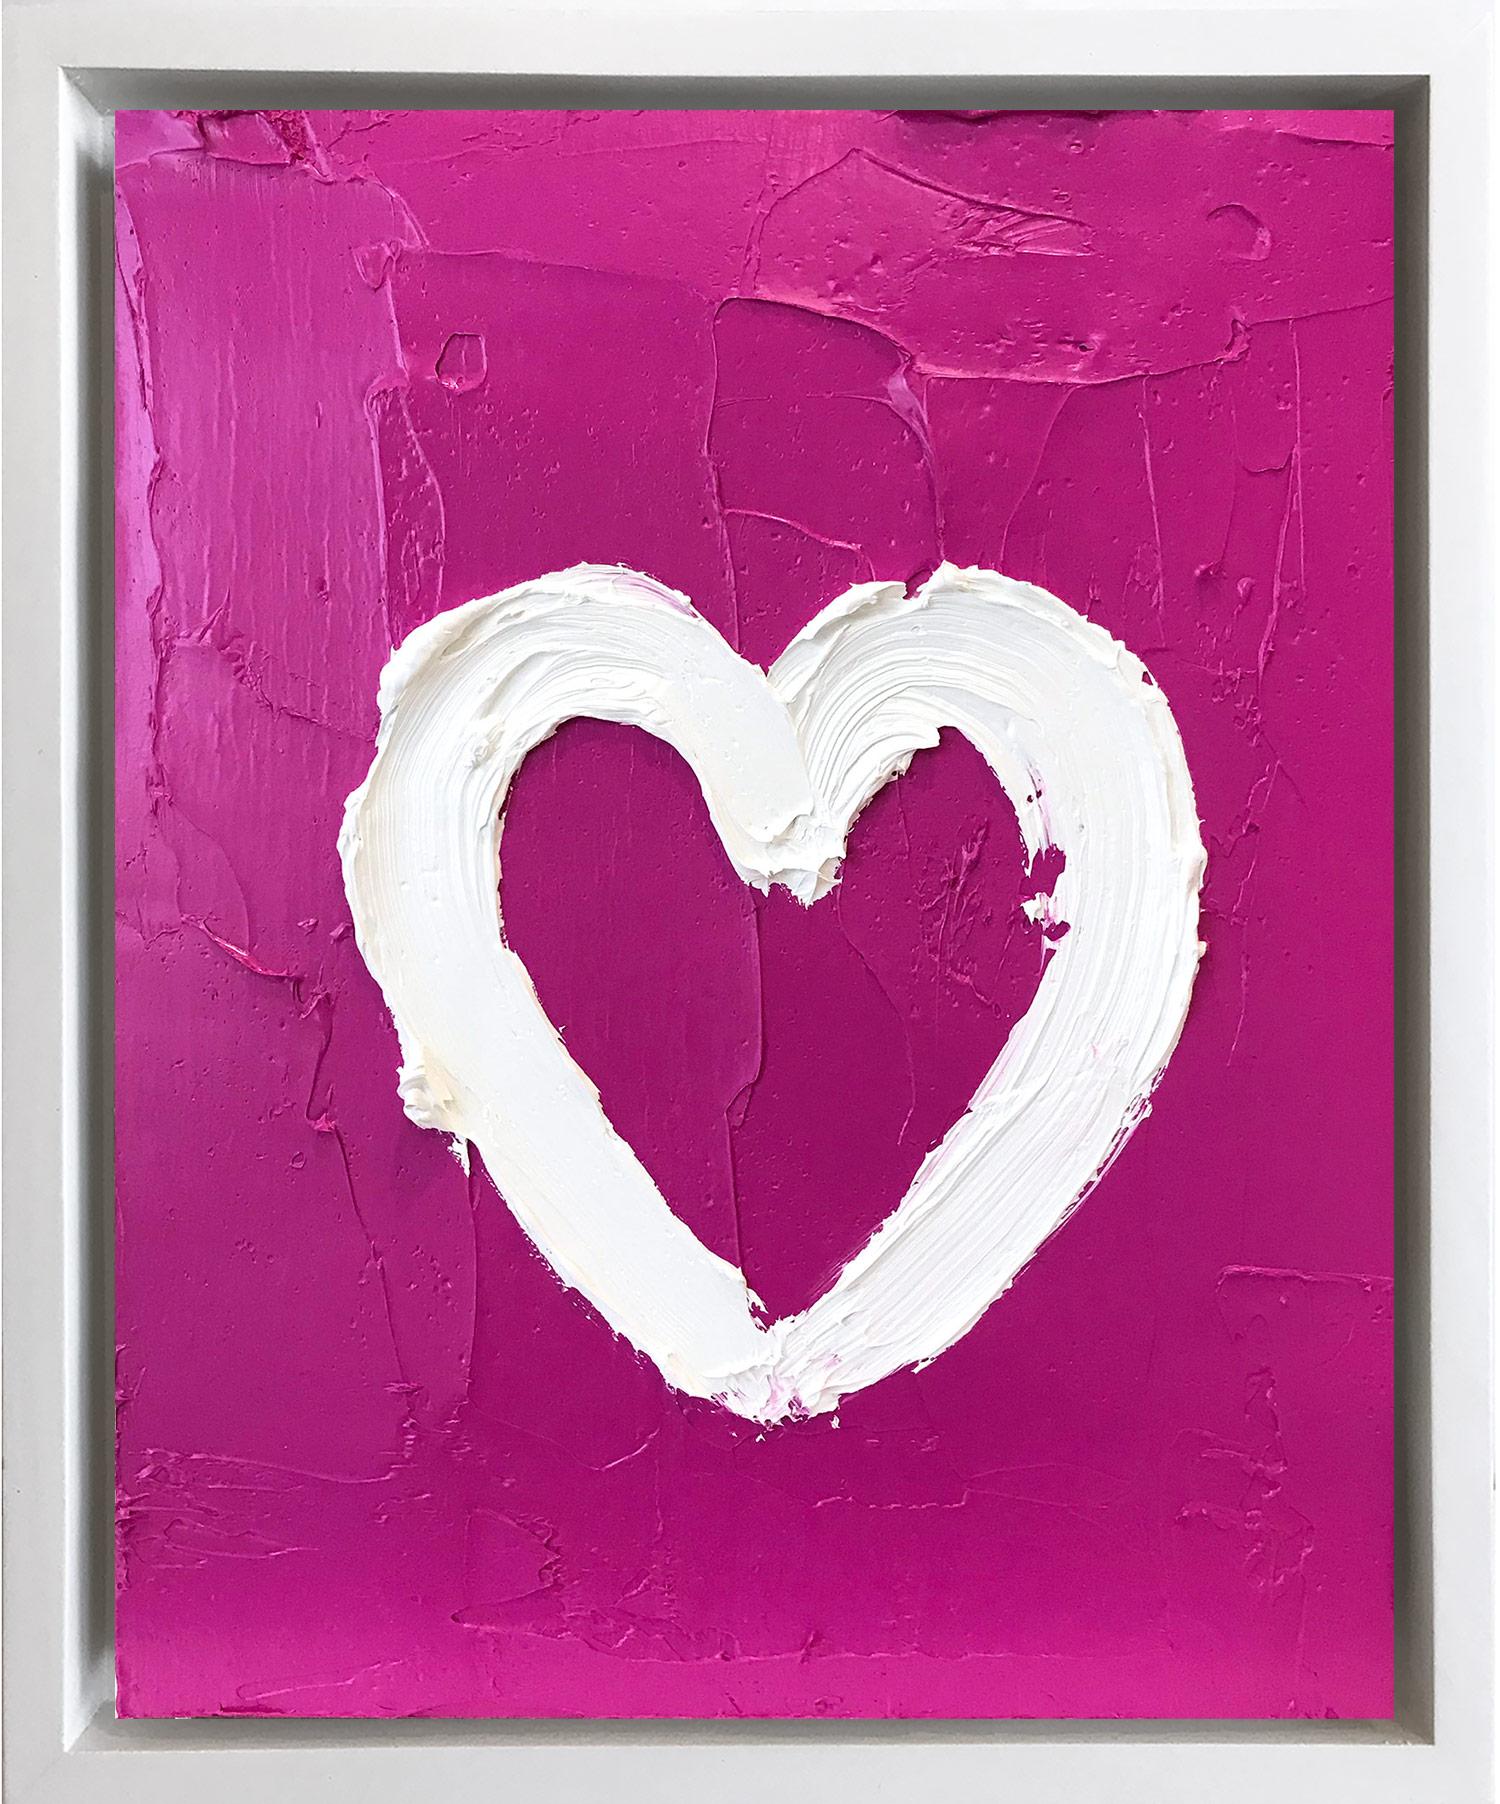 Cindy Shaoul Figurative Painting - "My Heart on Pink" Contemporary Oil Painting Framed w Floater Frame